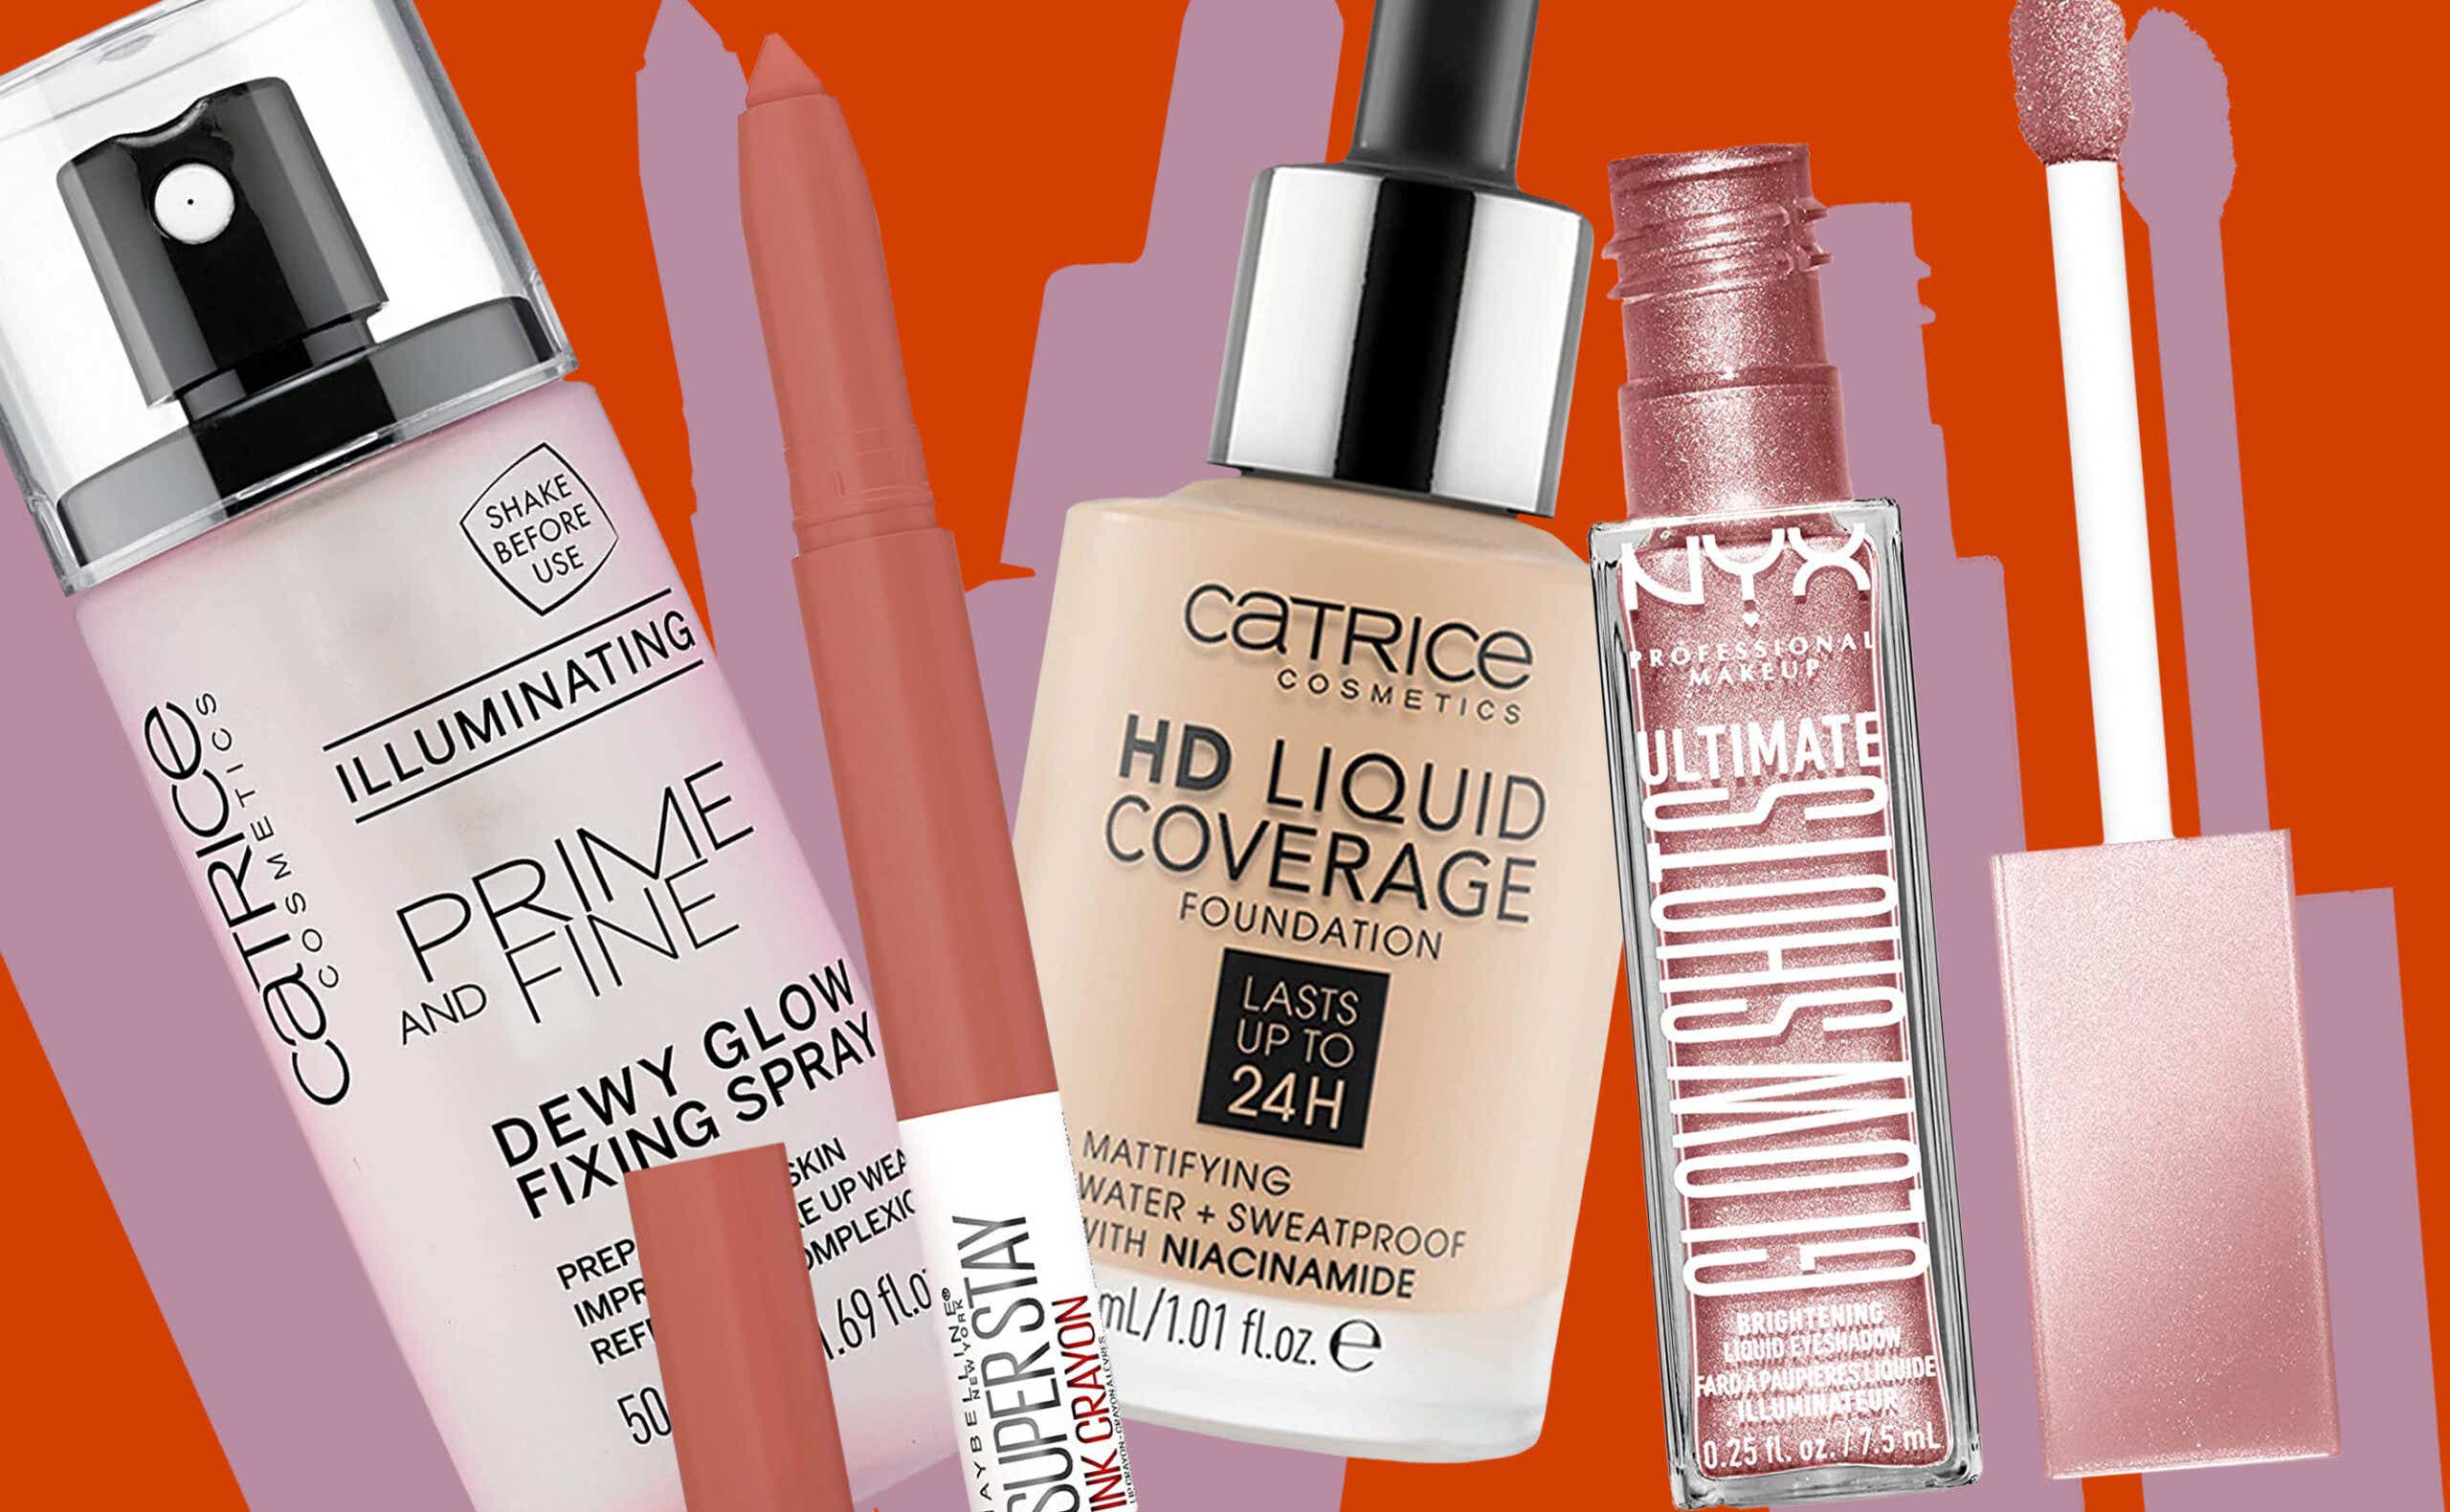 Drugstore Beauty Department Finds